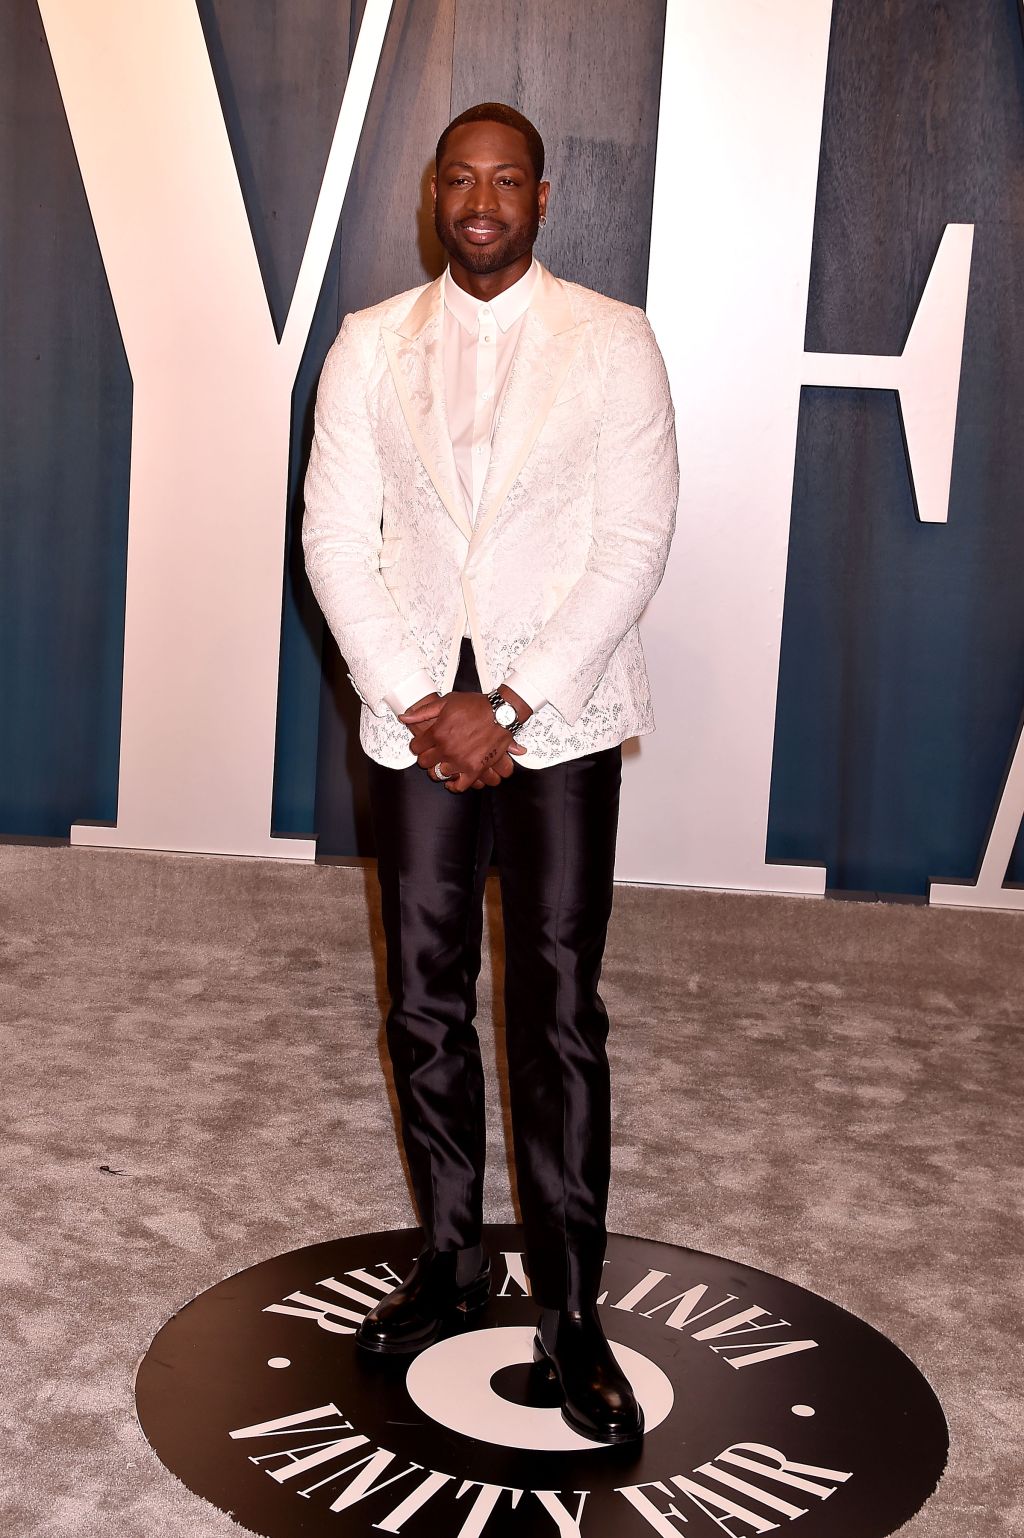 Dwayne Wade at the 2020 Vanity Fair Oscar Party at Wallis Annenberg Center for the Performing Arts